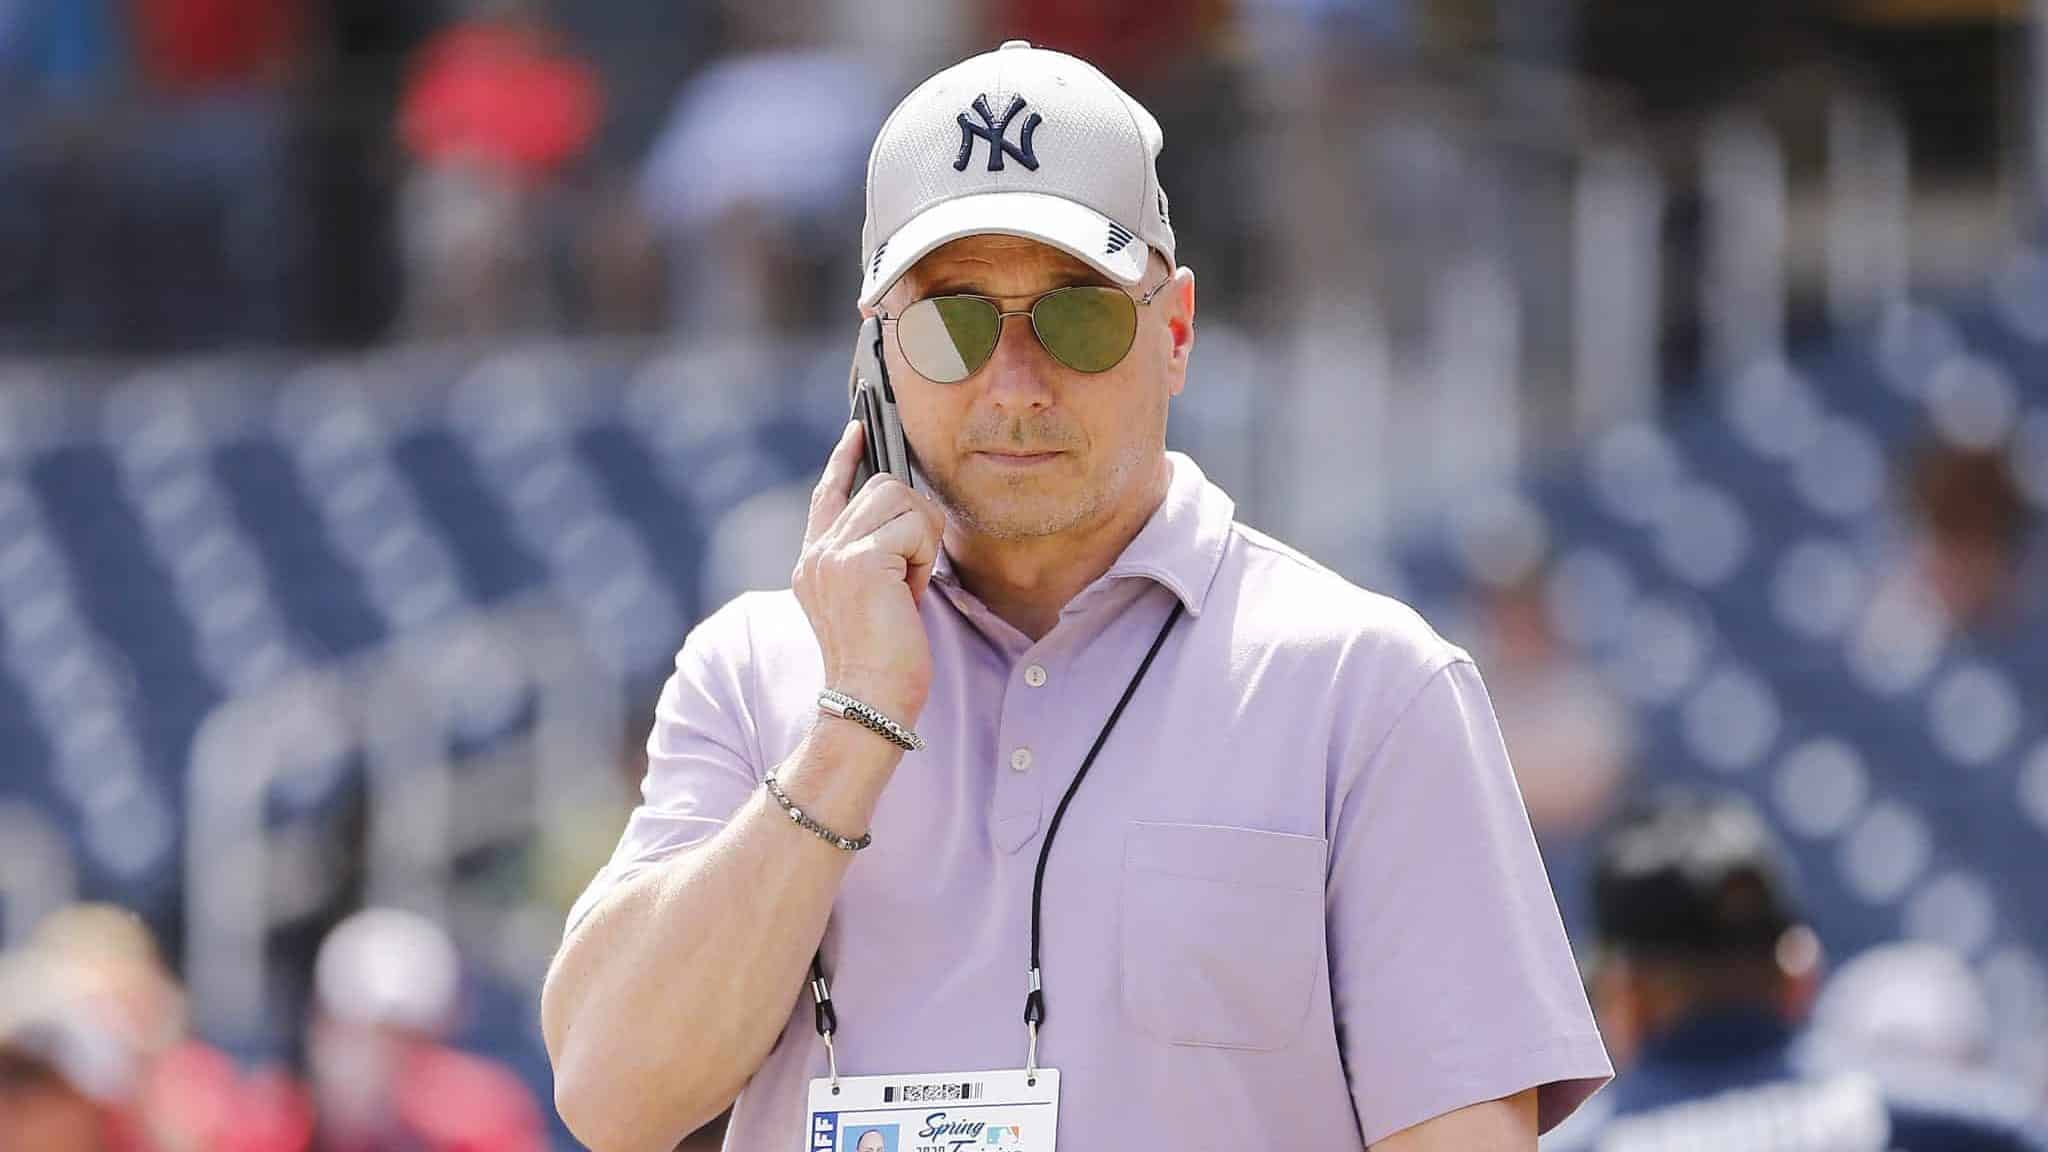 WEST PALM BEACH, FLORIDA - MARCH 12: New York Yankees general manager Brian Cashman talks on the phone prior to a Grapefruit League spring training game between the Washington Nationals and the New York Yankees at FITTEAM Ballpark of The Palm Beaches on March 12, 2020 in West Palm Beach, Florida. Many professional and college sports are canceling or postponing their games due to the ongoing threat of the Coronavirus (COVID-19) outbreak.